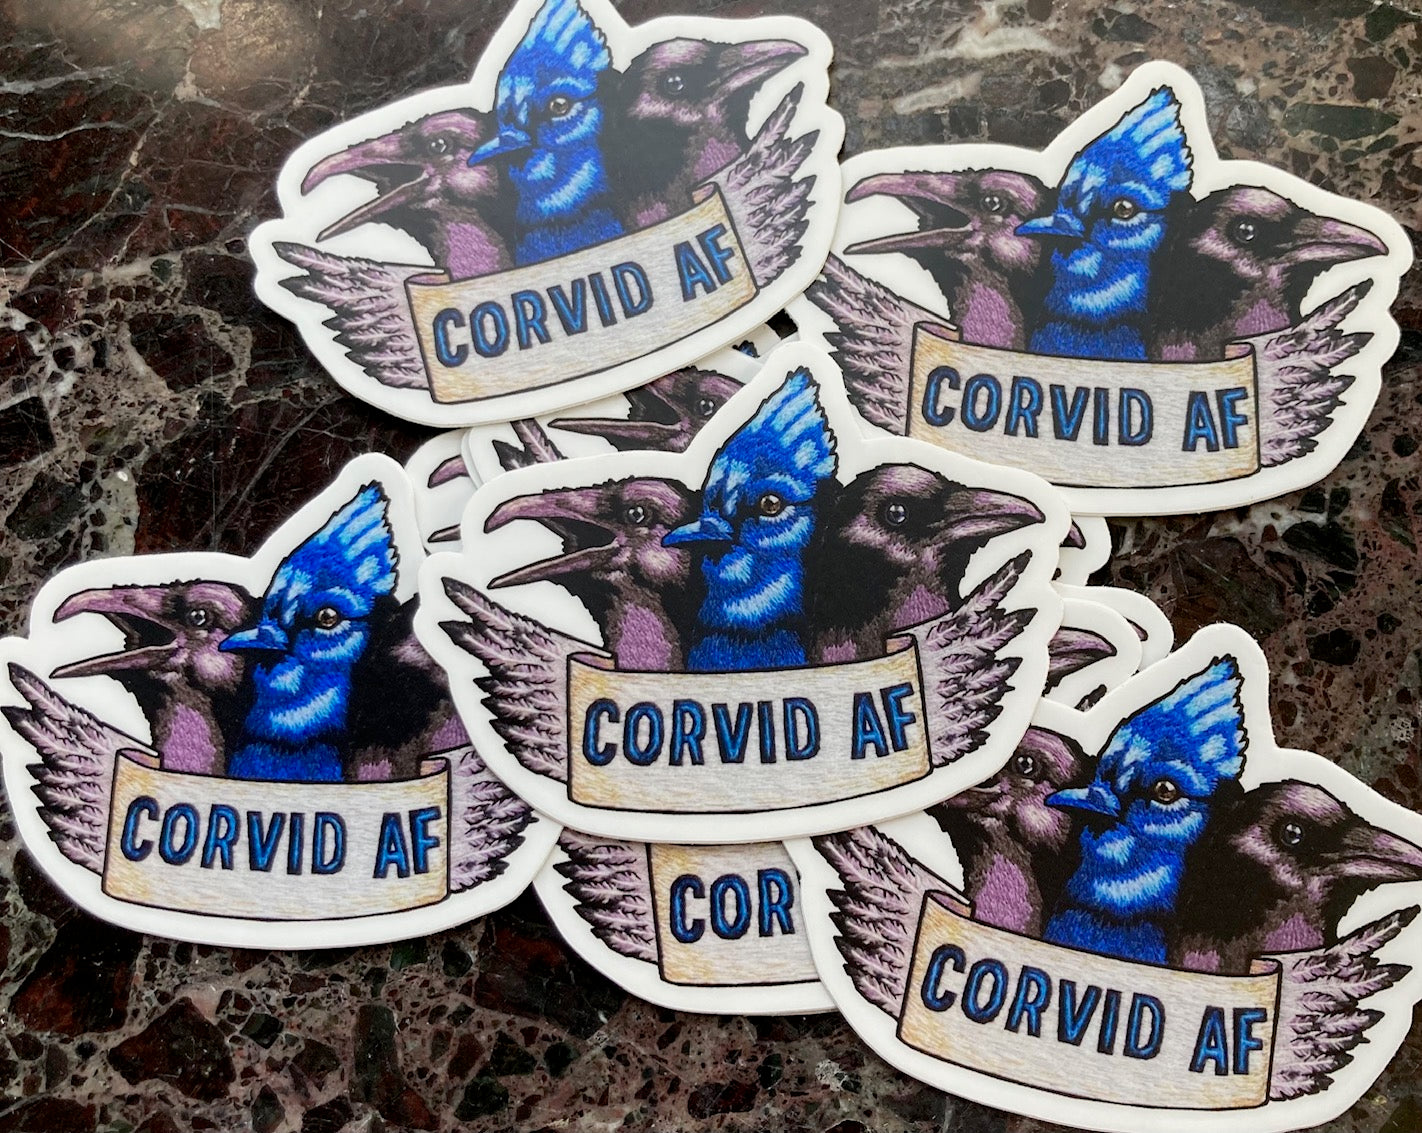 A pile of stickers sits atop a dark marble surface. The stickers depict an embroidery of the heads of three Corvids: a raven, a blue jay, and a crow. Below them is a banner that reads "CORVID AF" and the edge of the banner is feathers. 